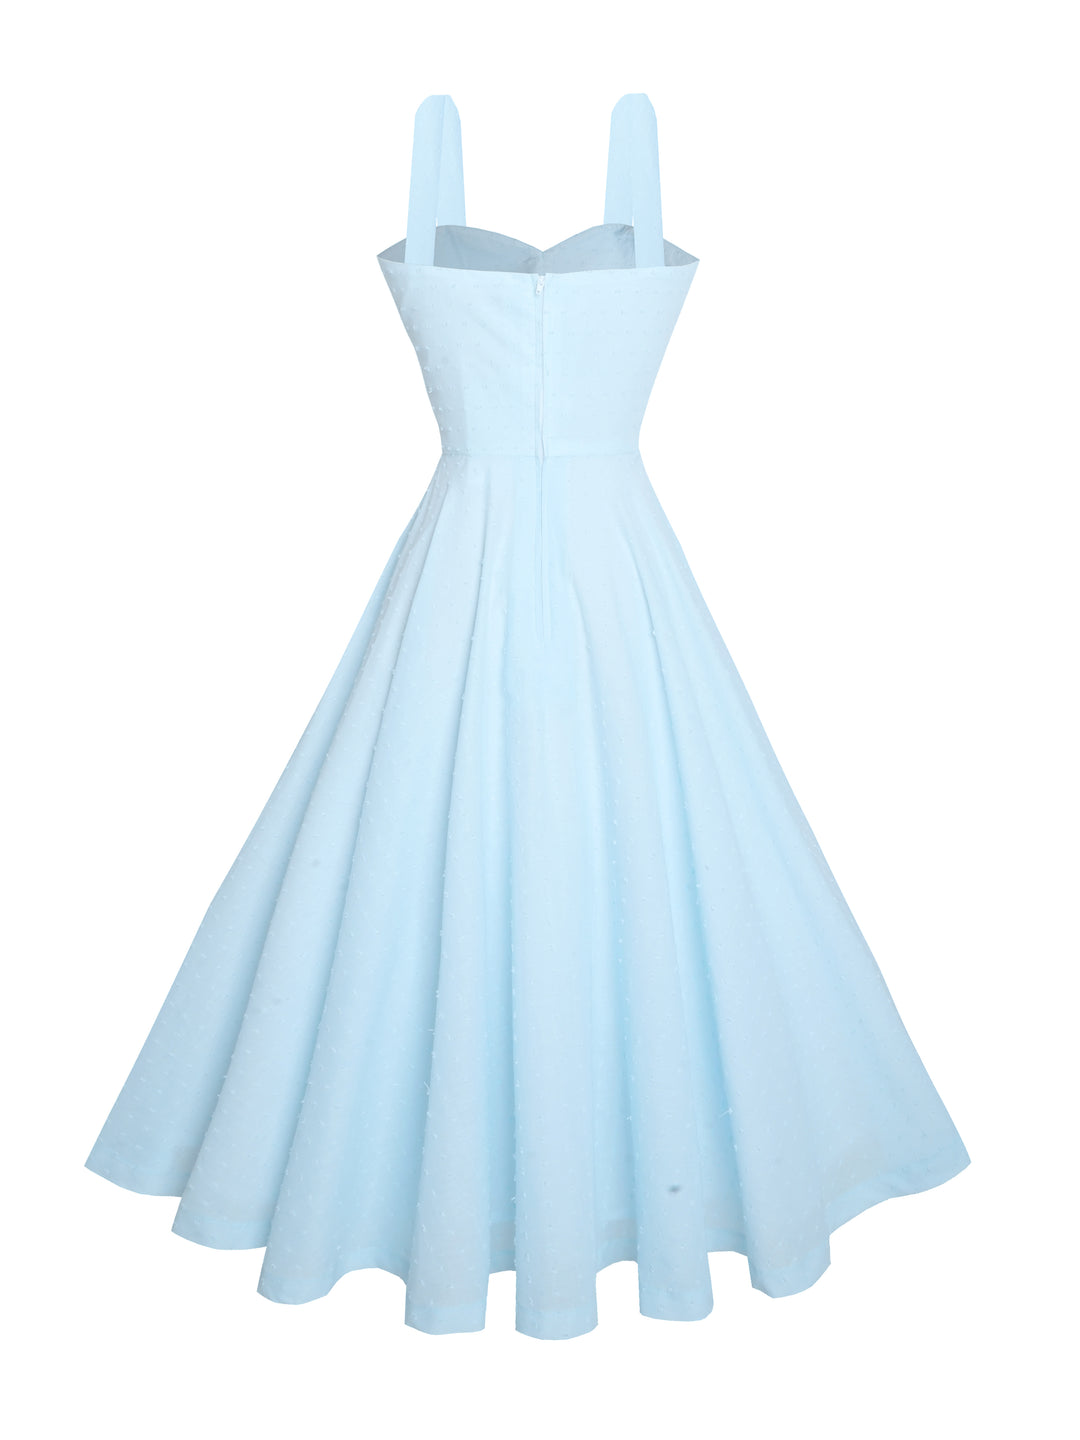 MTO - Catalina Dress Baby Blue "Dotted Swiss"